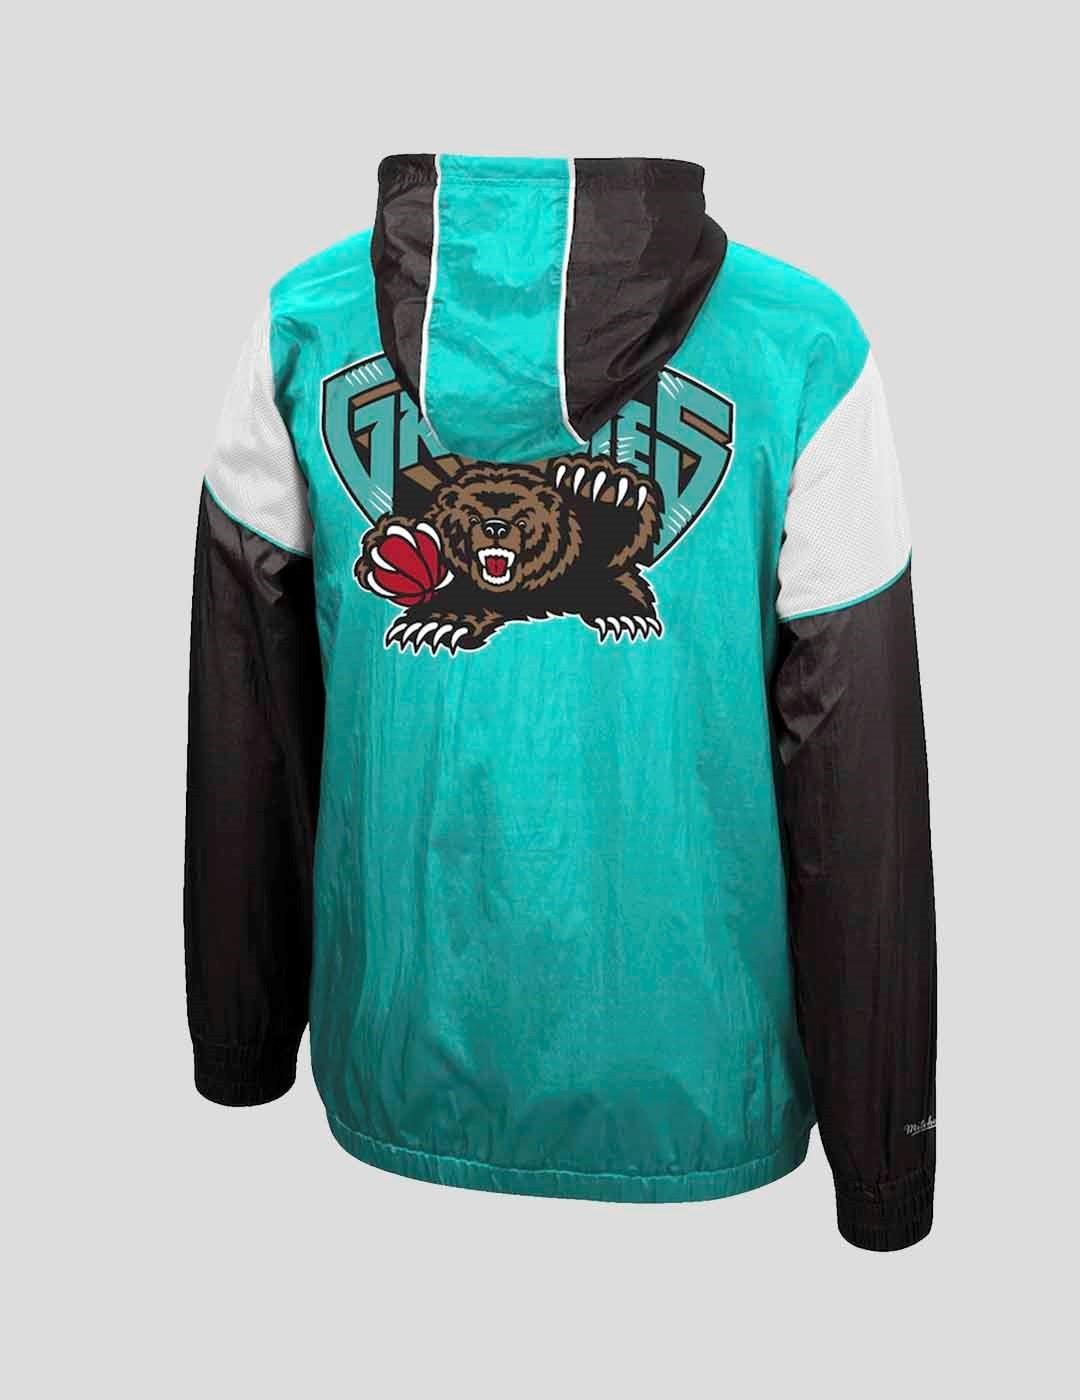 CHAQUETA MITCHELL & NESS HIGHLIGHT REEL VANCOUVER GRIZZLIES WINDBREAKER TEAL